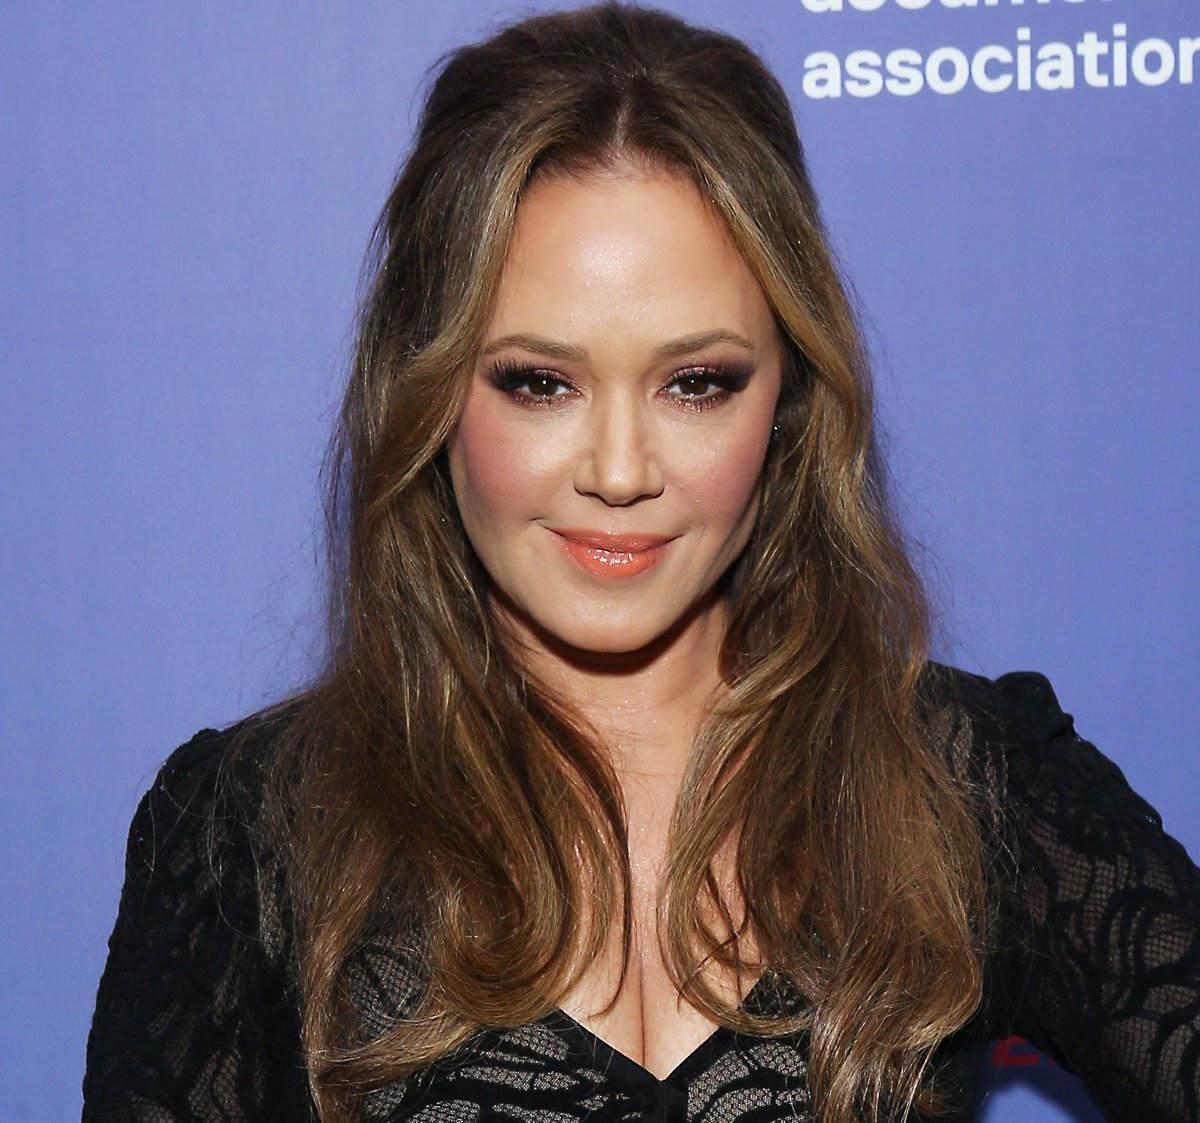 Leah Remini attends the International Documentary Association's 35th Annual IDA Documentary Awards held at Paramount Studios on December 07, 2019 in Hollywood, California